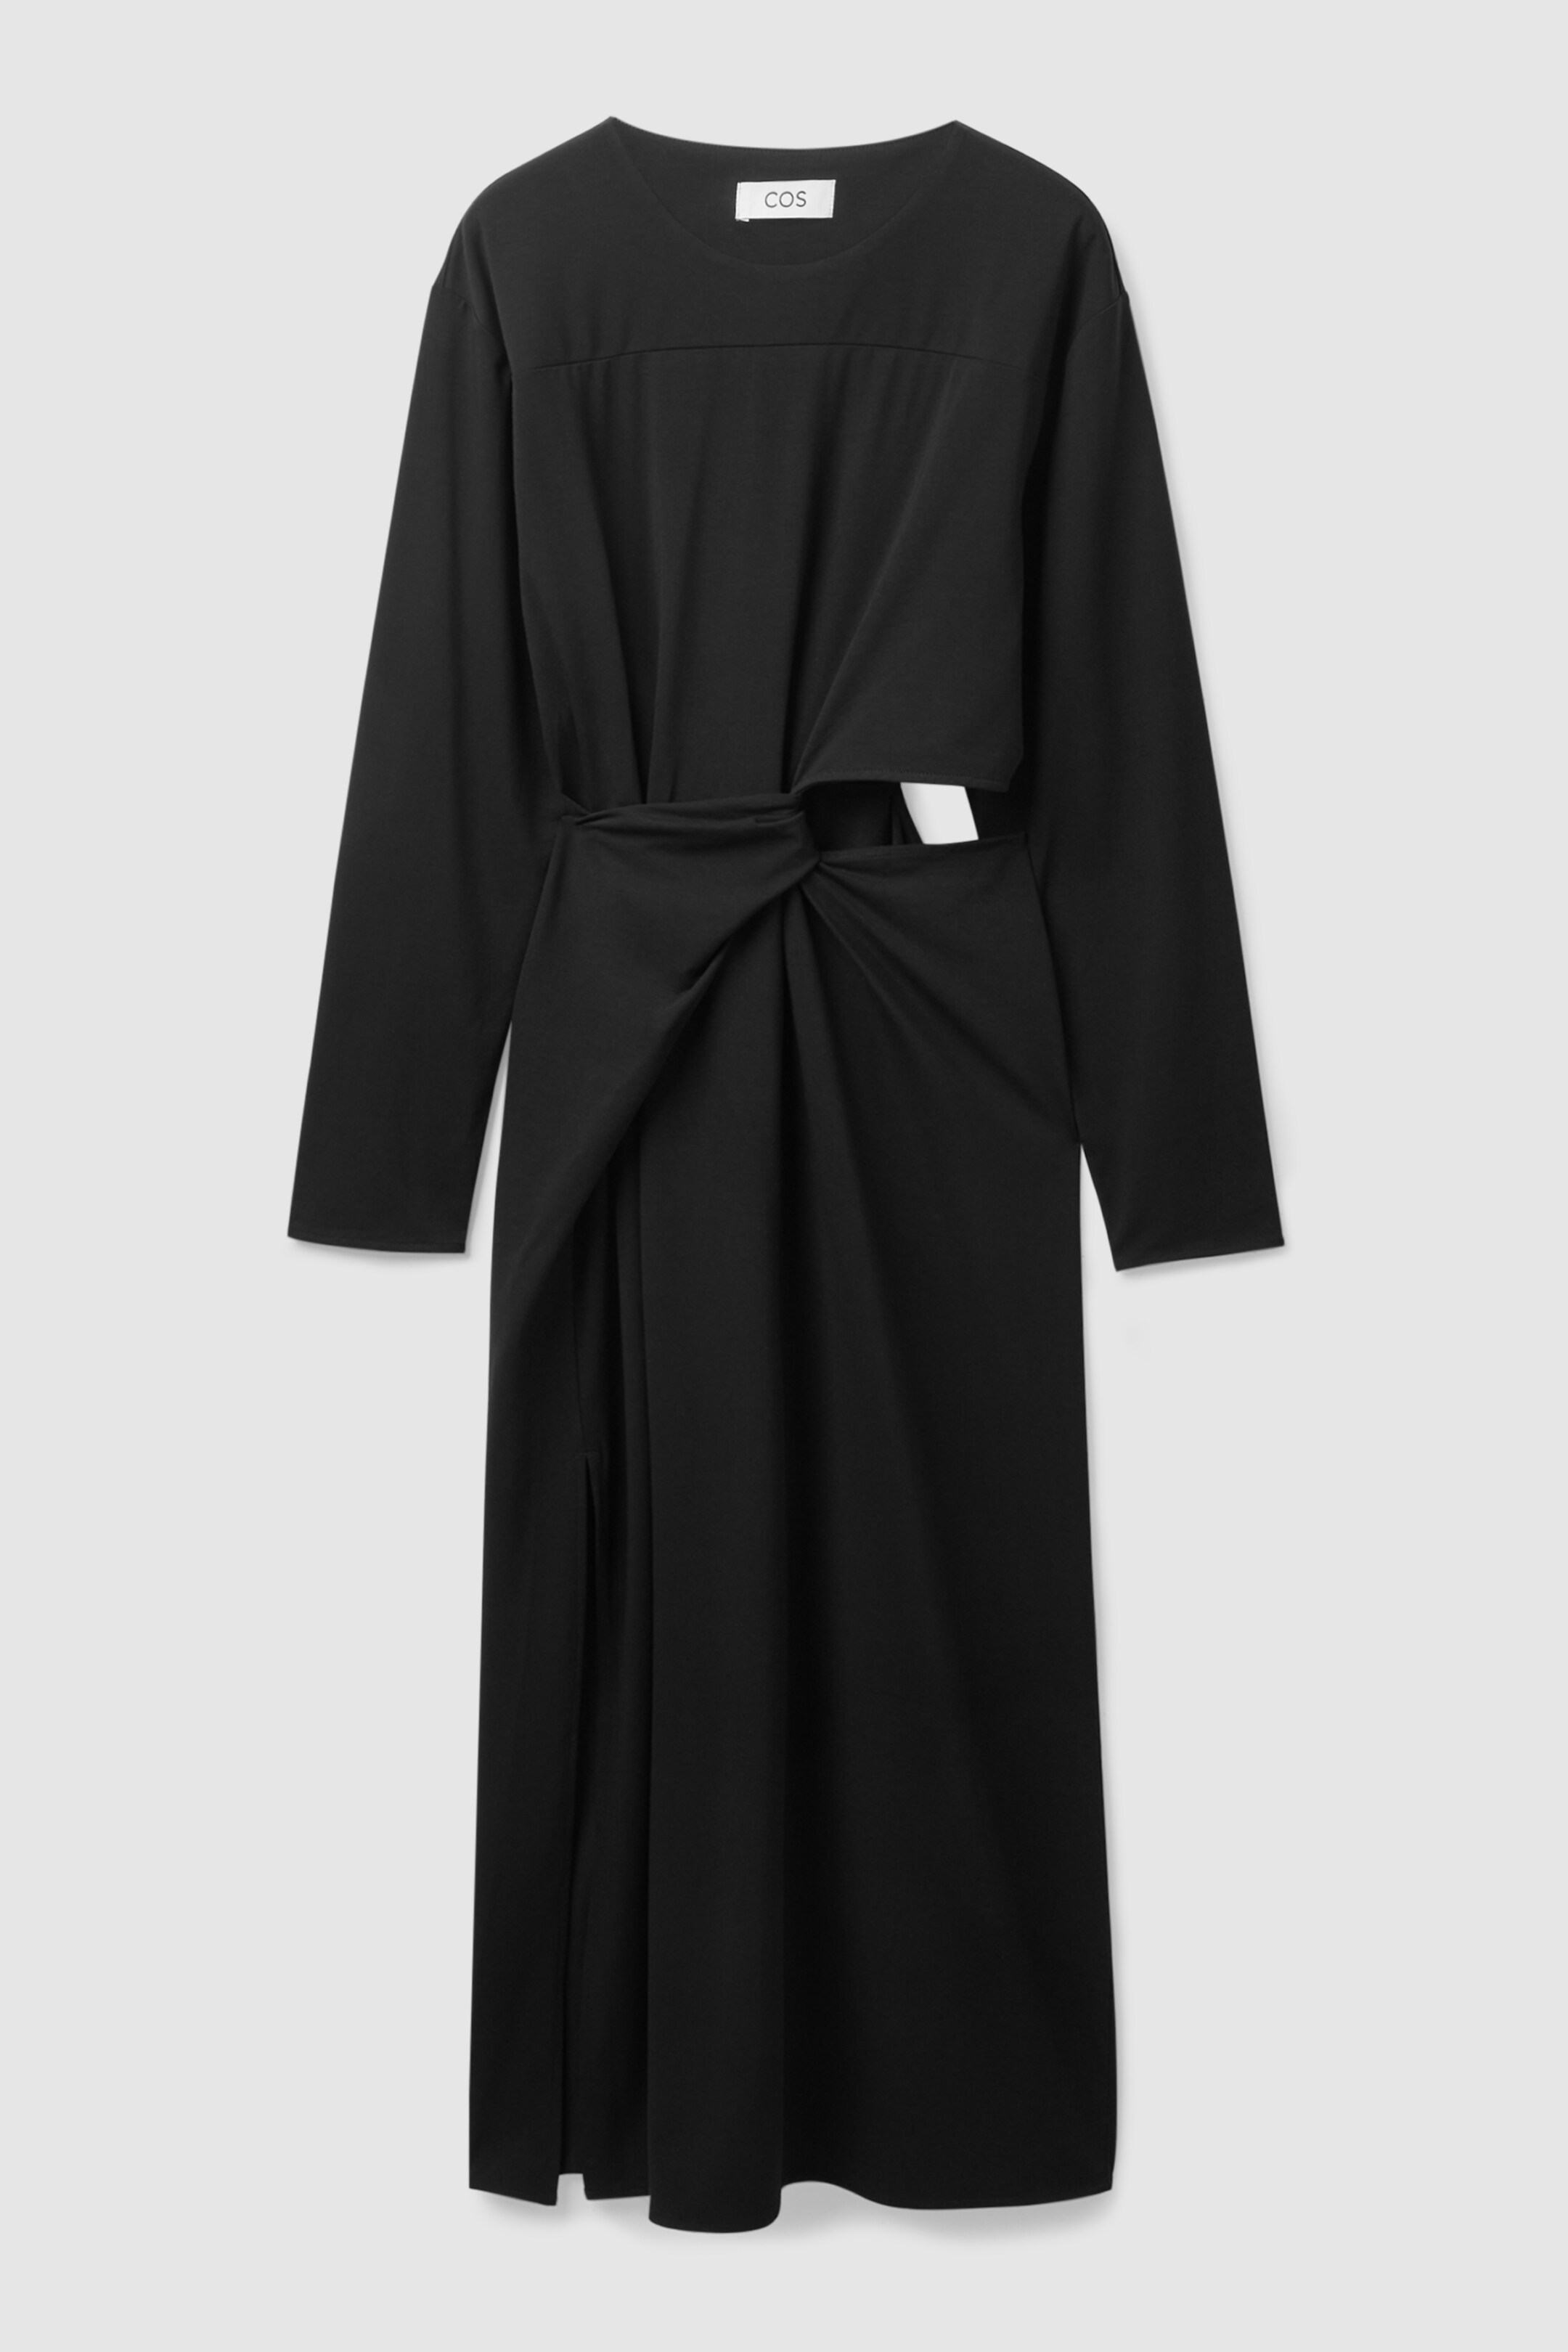 Front image of cos CUT-OUT MIDI DRESS in BLACK